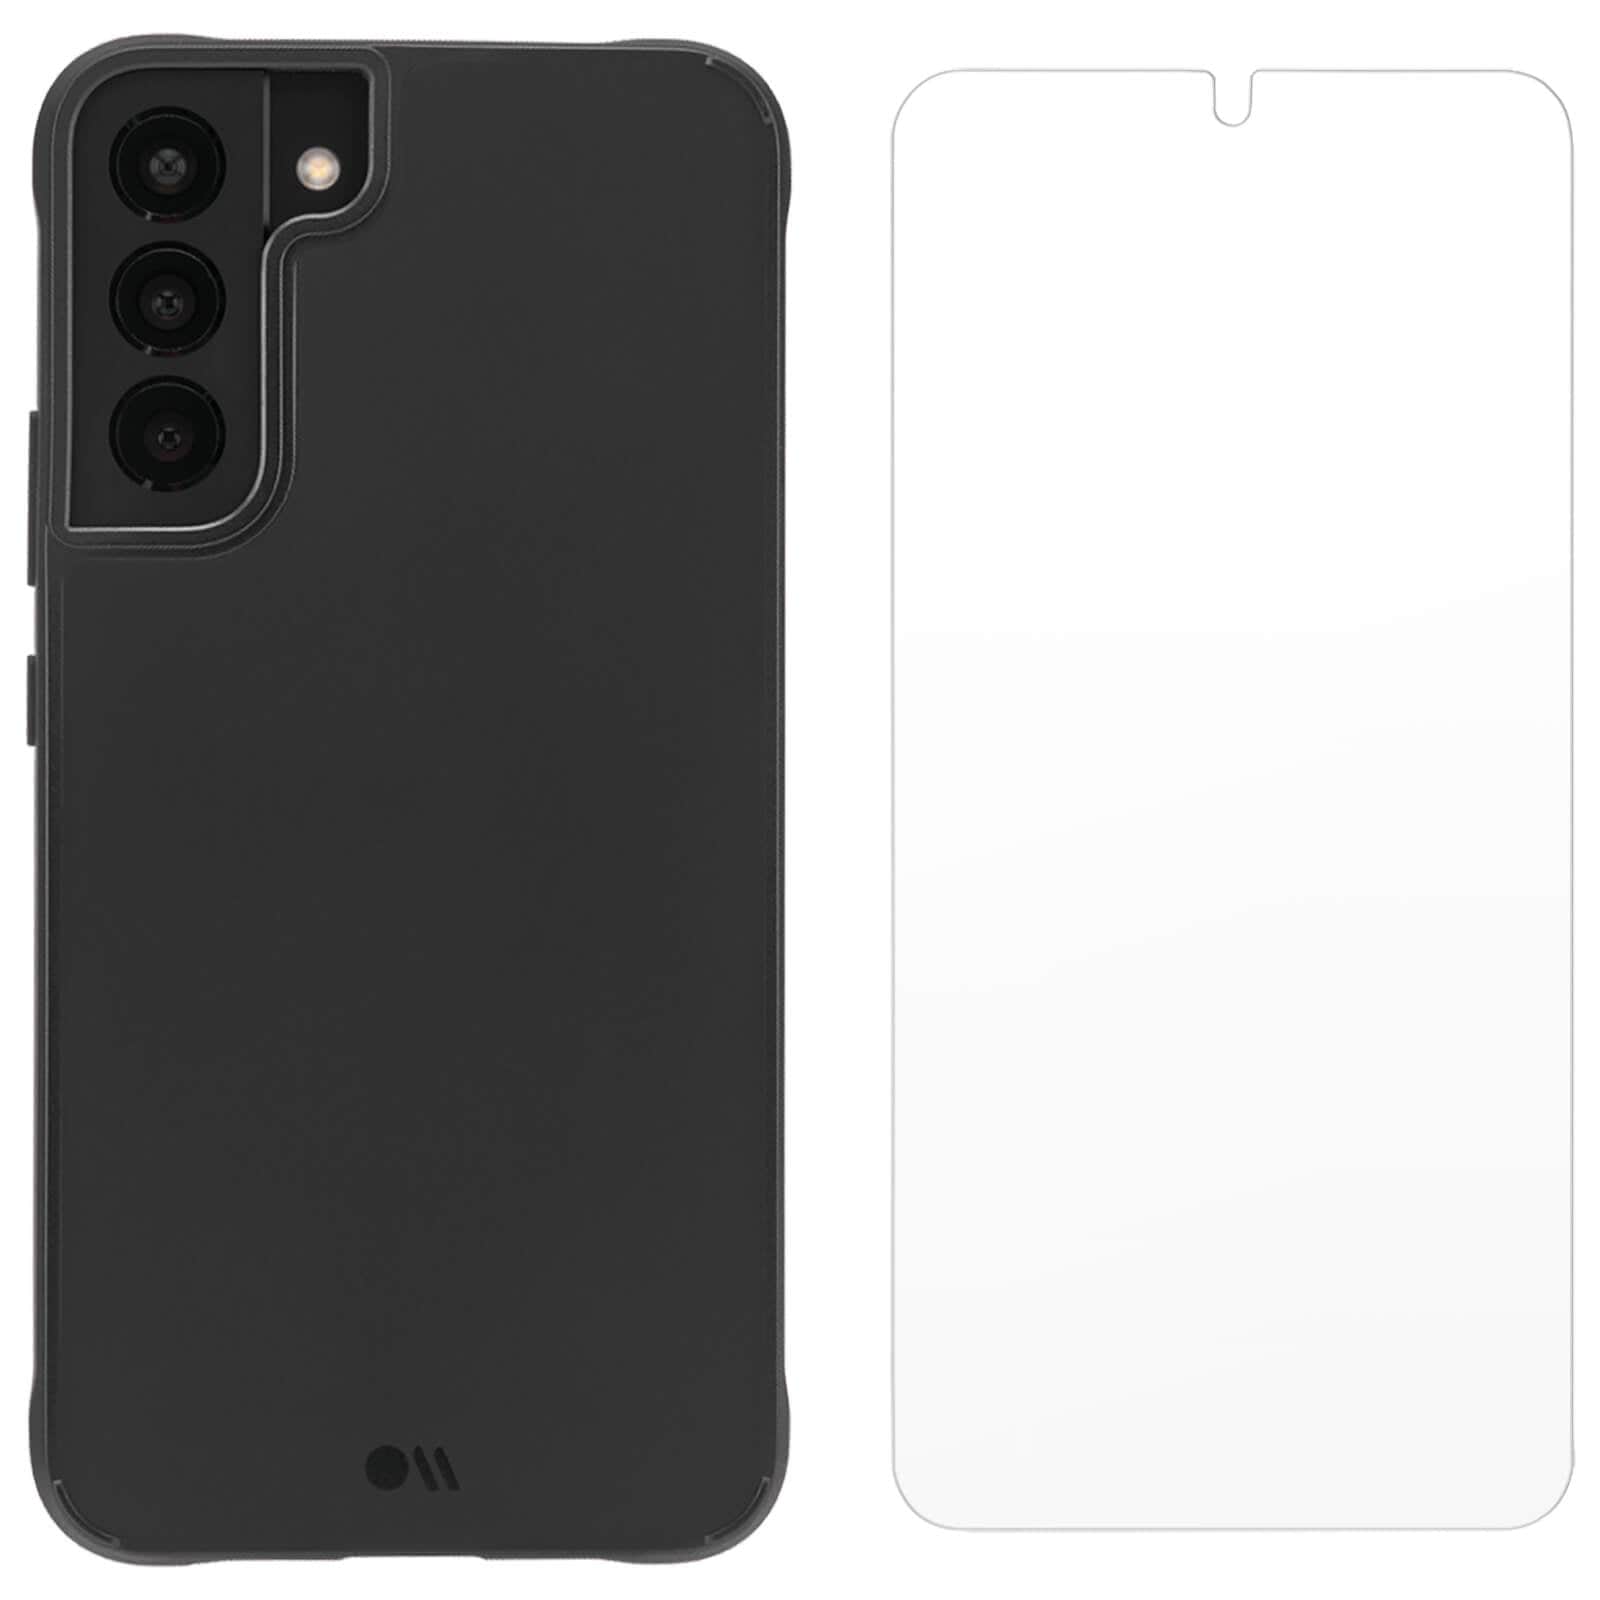 CASE AND SCREEN PROTECTOR INCLUDED IN PACK. COLOR::BLACK